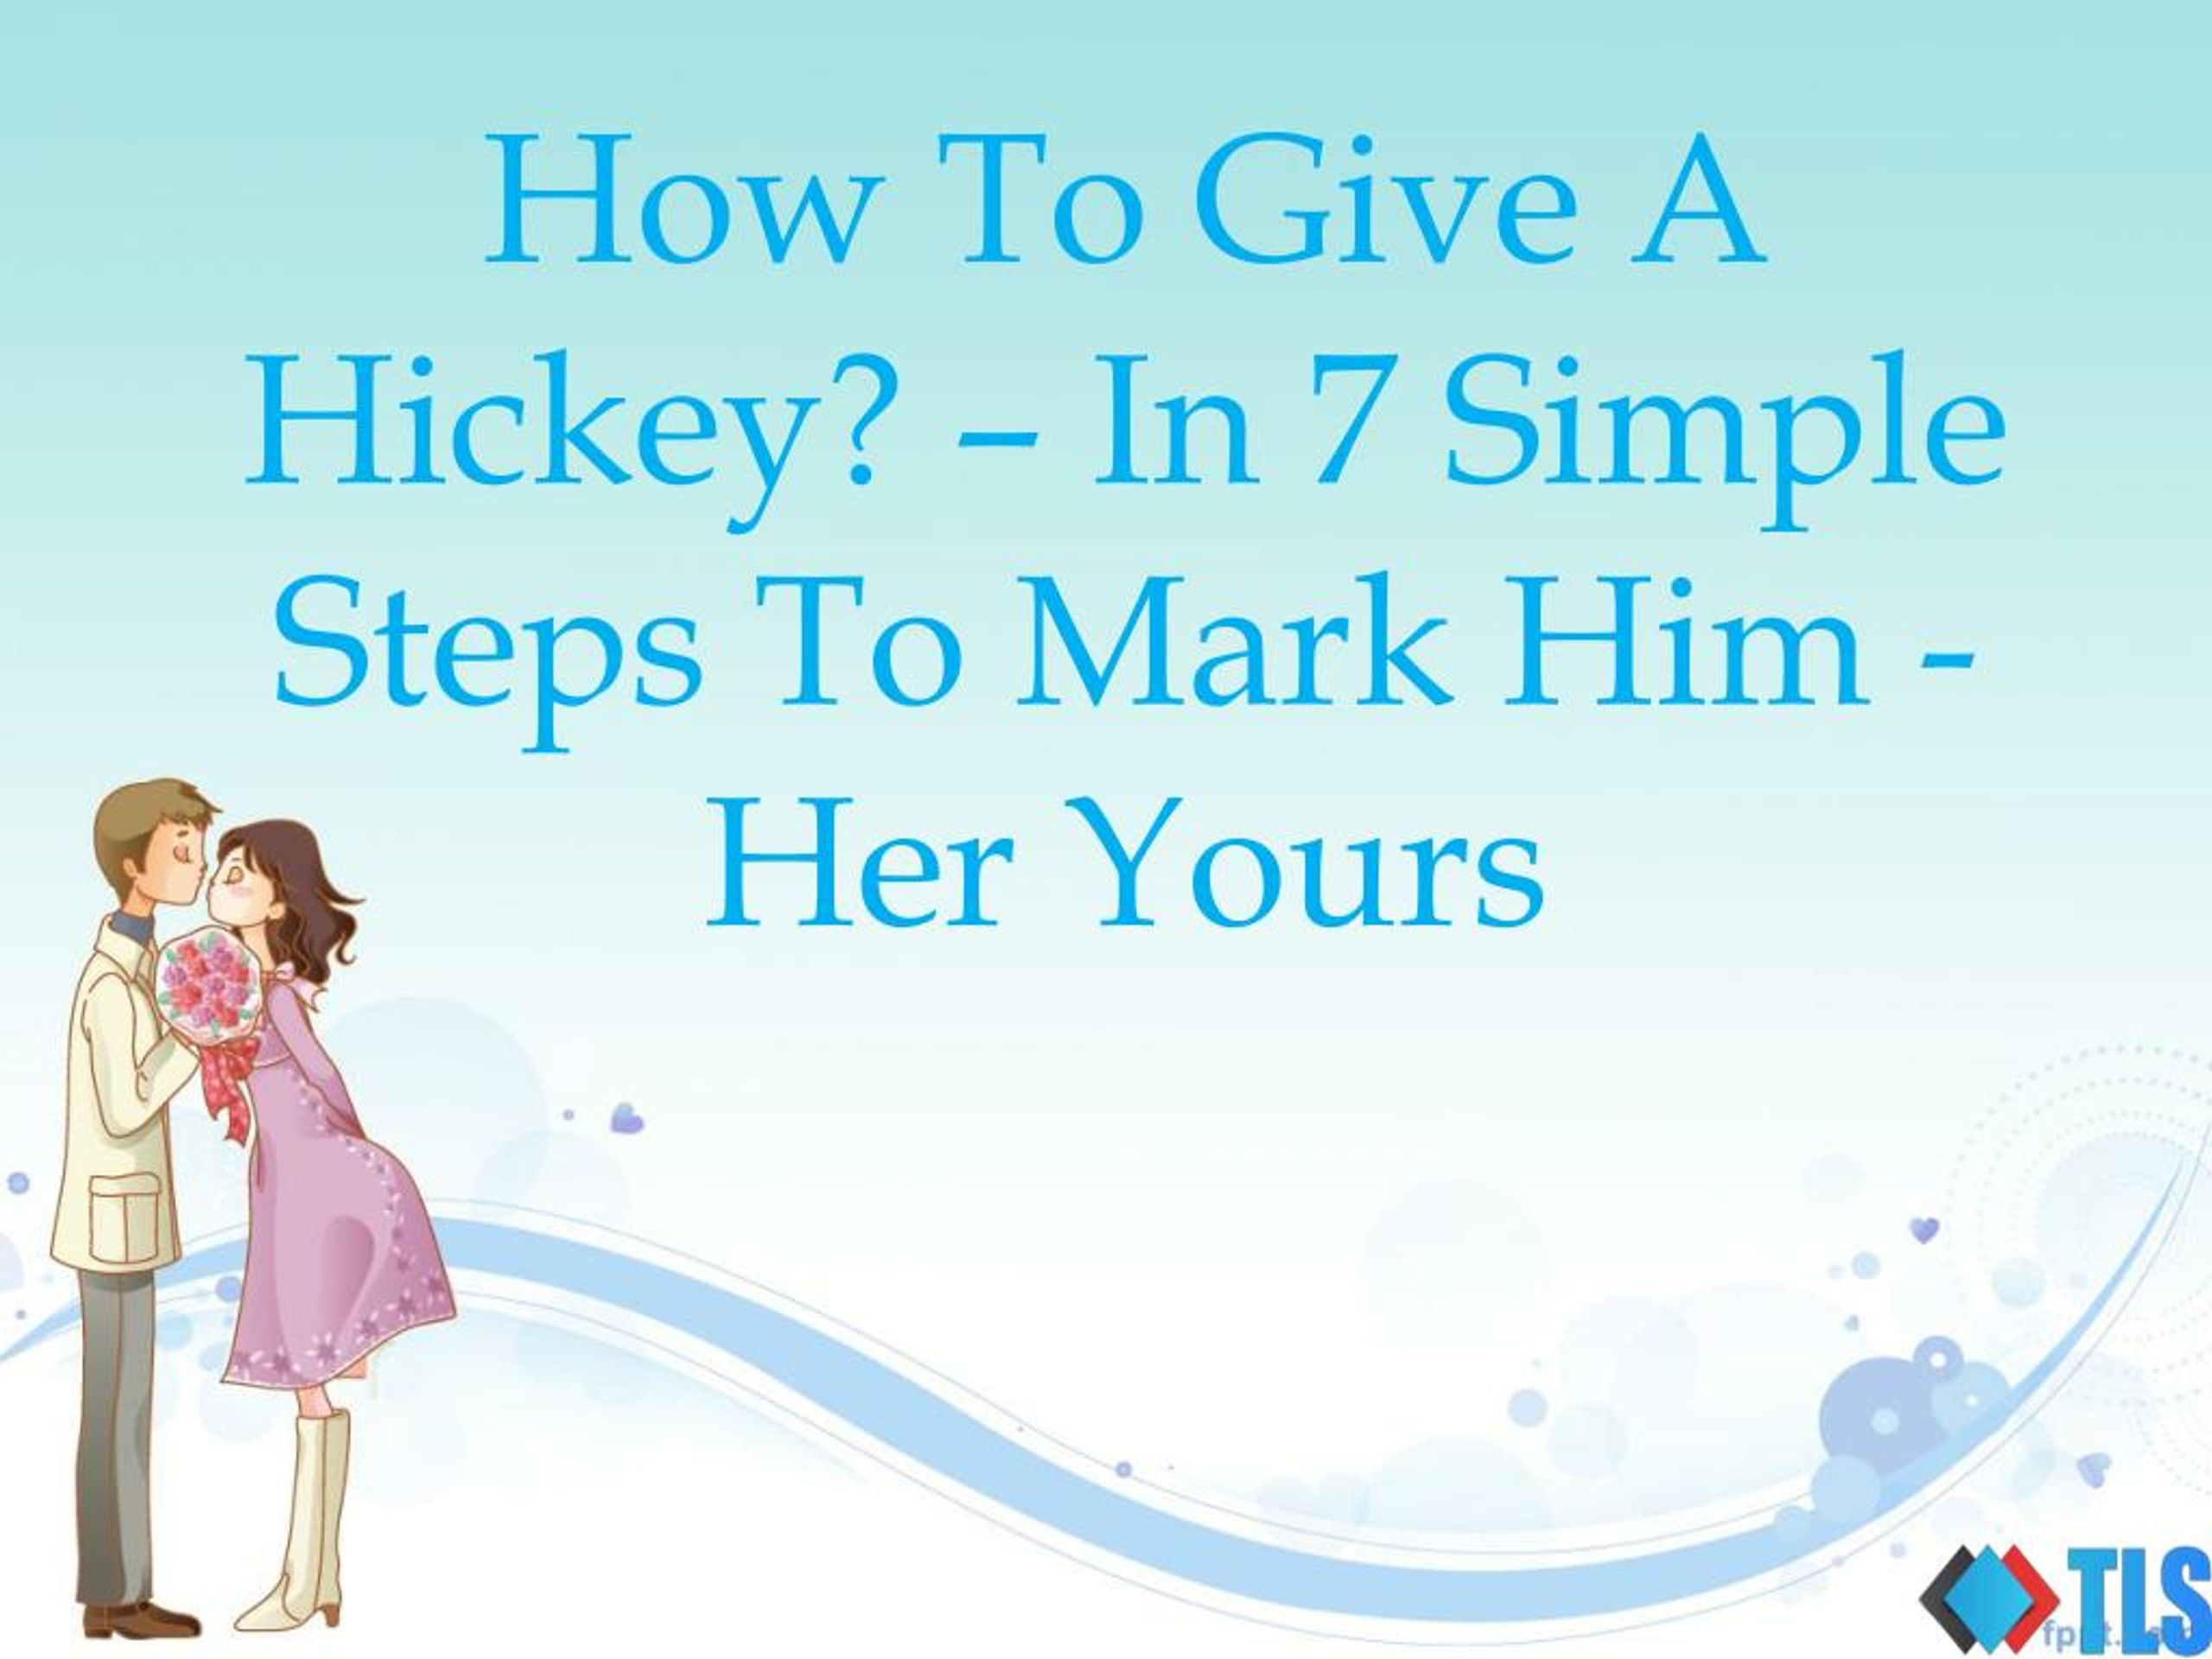 how to give a hickey in 7 simple steps to mark him her yours.